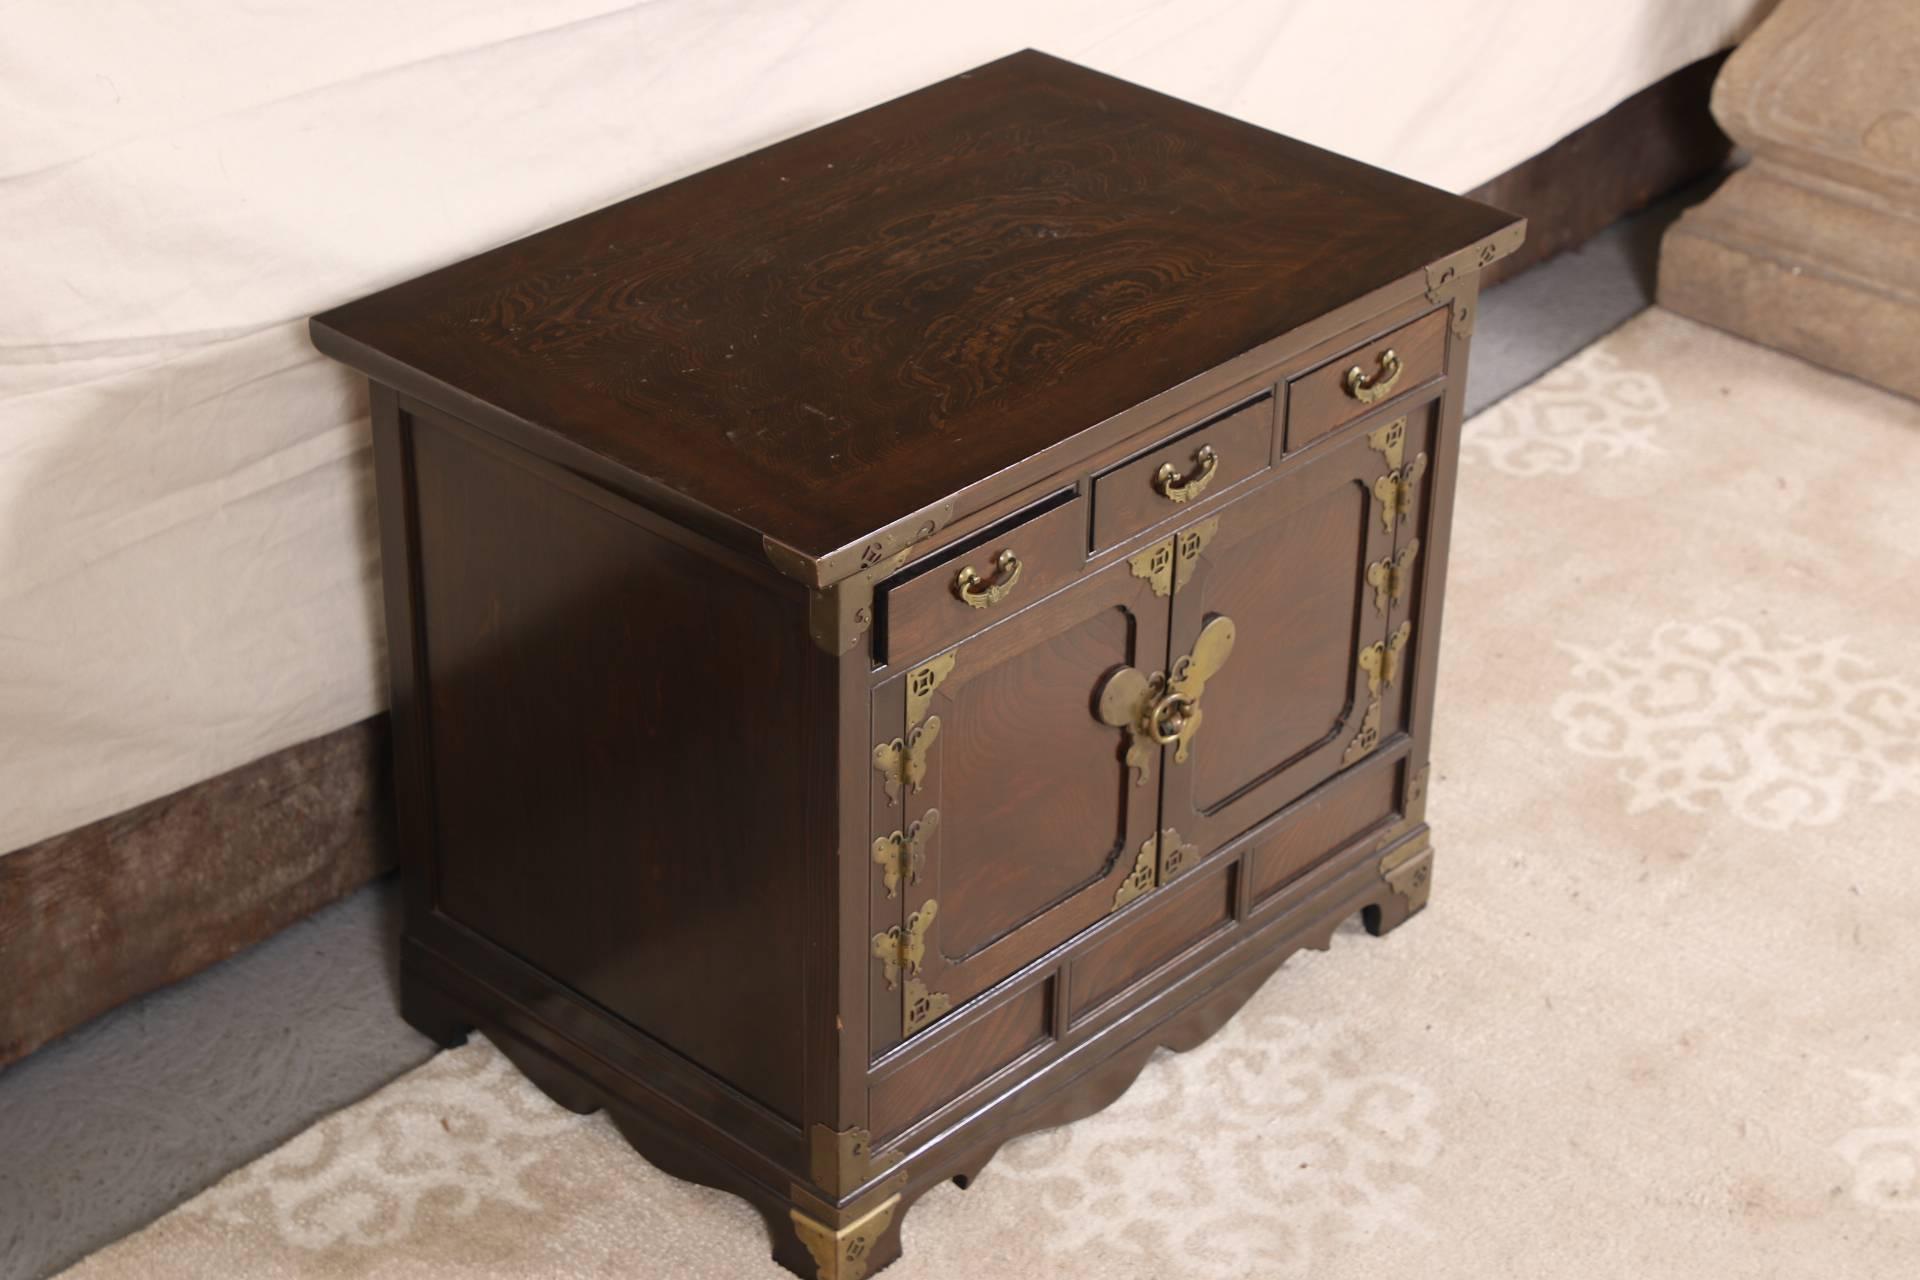 A rectangular cabinet with a banded top, three apron drawers, recessed lower panels and recessed paneled double doors. the shaped lower frame with block feet. Brass hardware on the corners and bat form pulls, door hinges, and front lock (lacking the